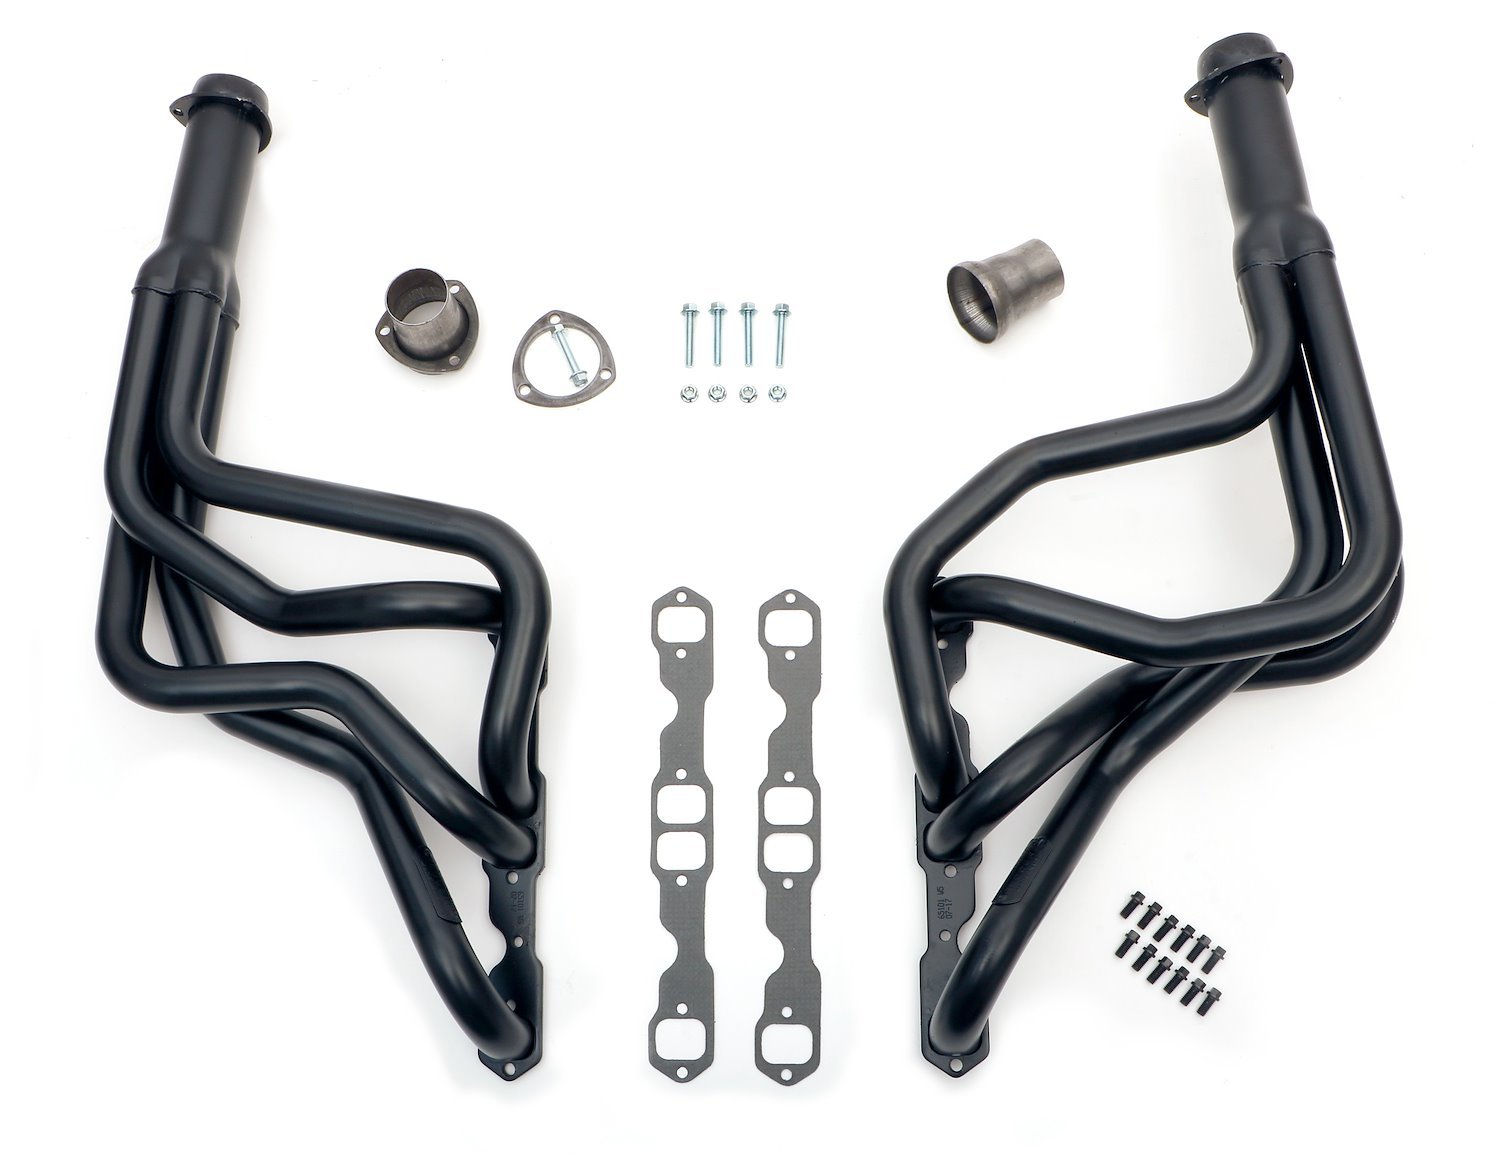 Standard Duty Uncoated Headers for 1964-77 Chevelle, Malibu